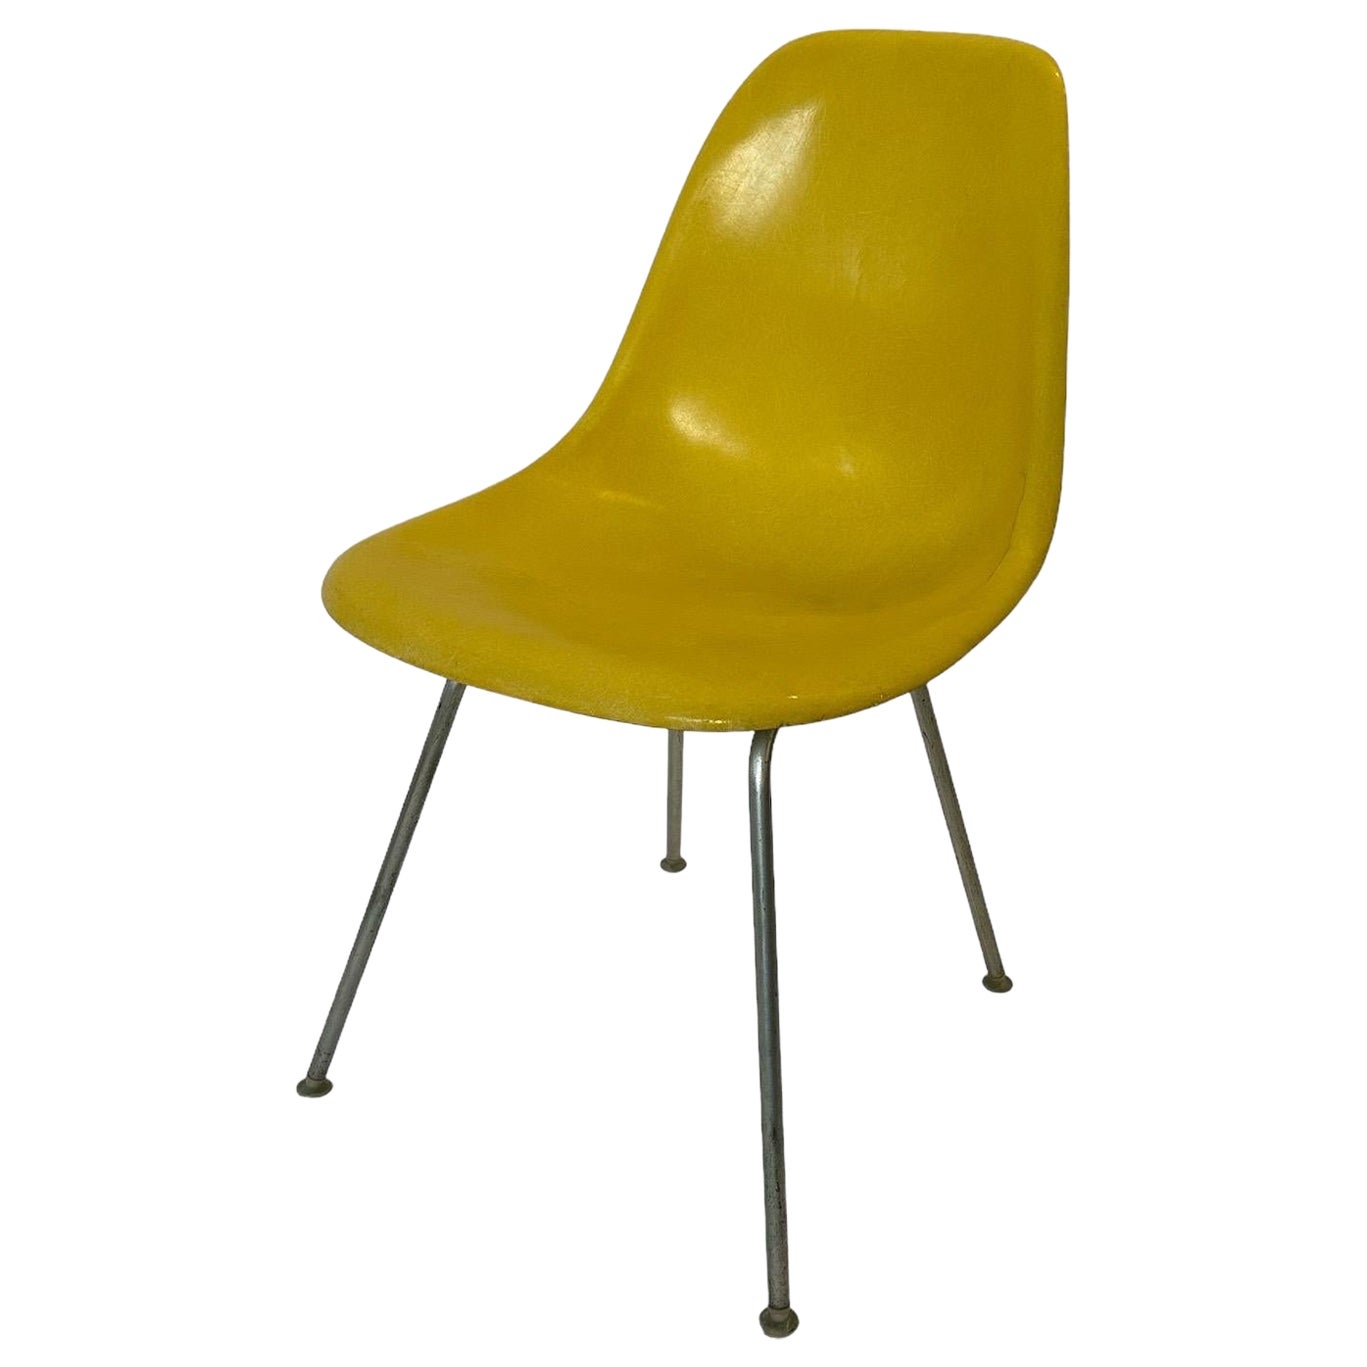 Herman Miller Eames Fiberglass Dining Chair in Brilliant Yellow For Sale